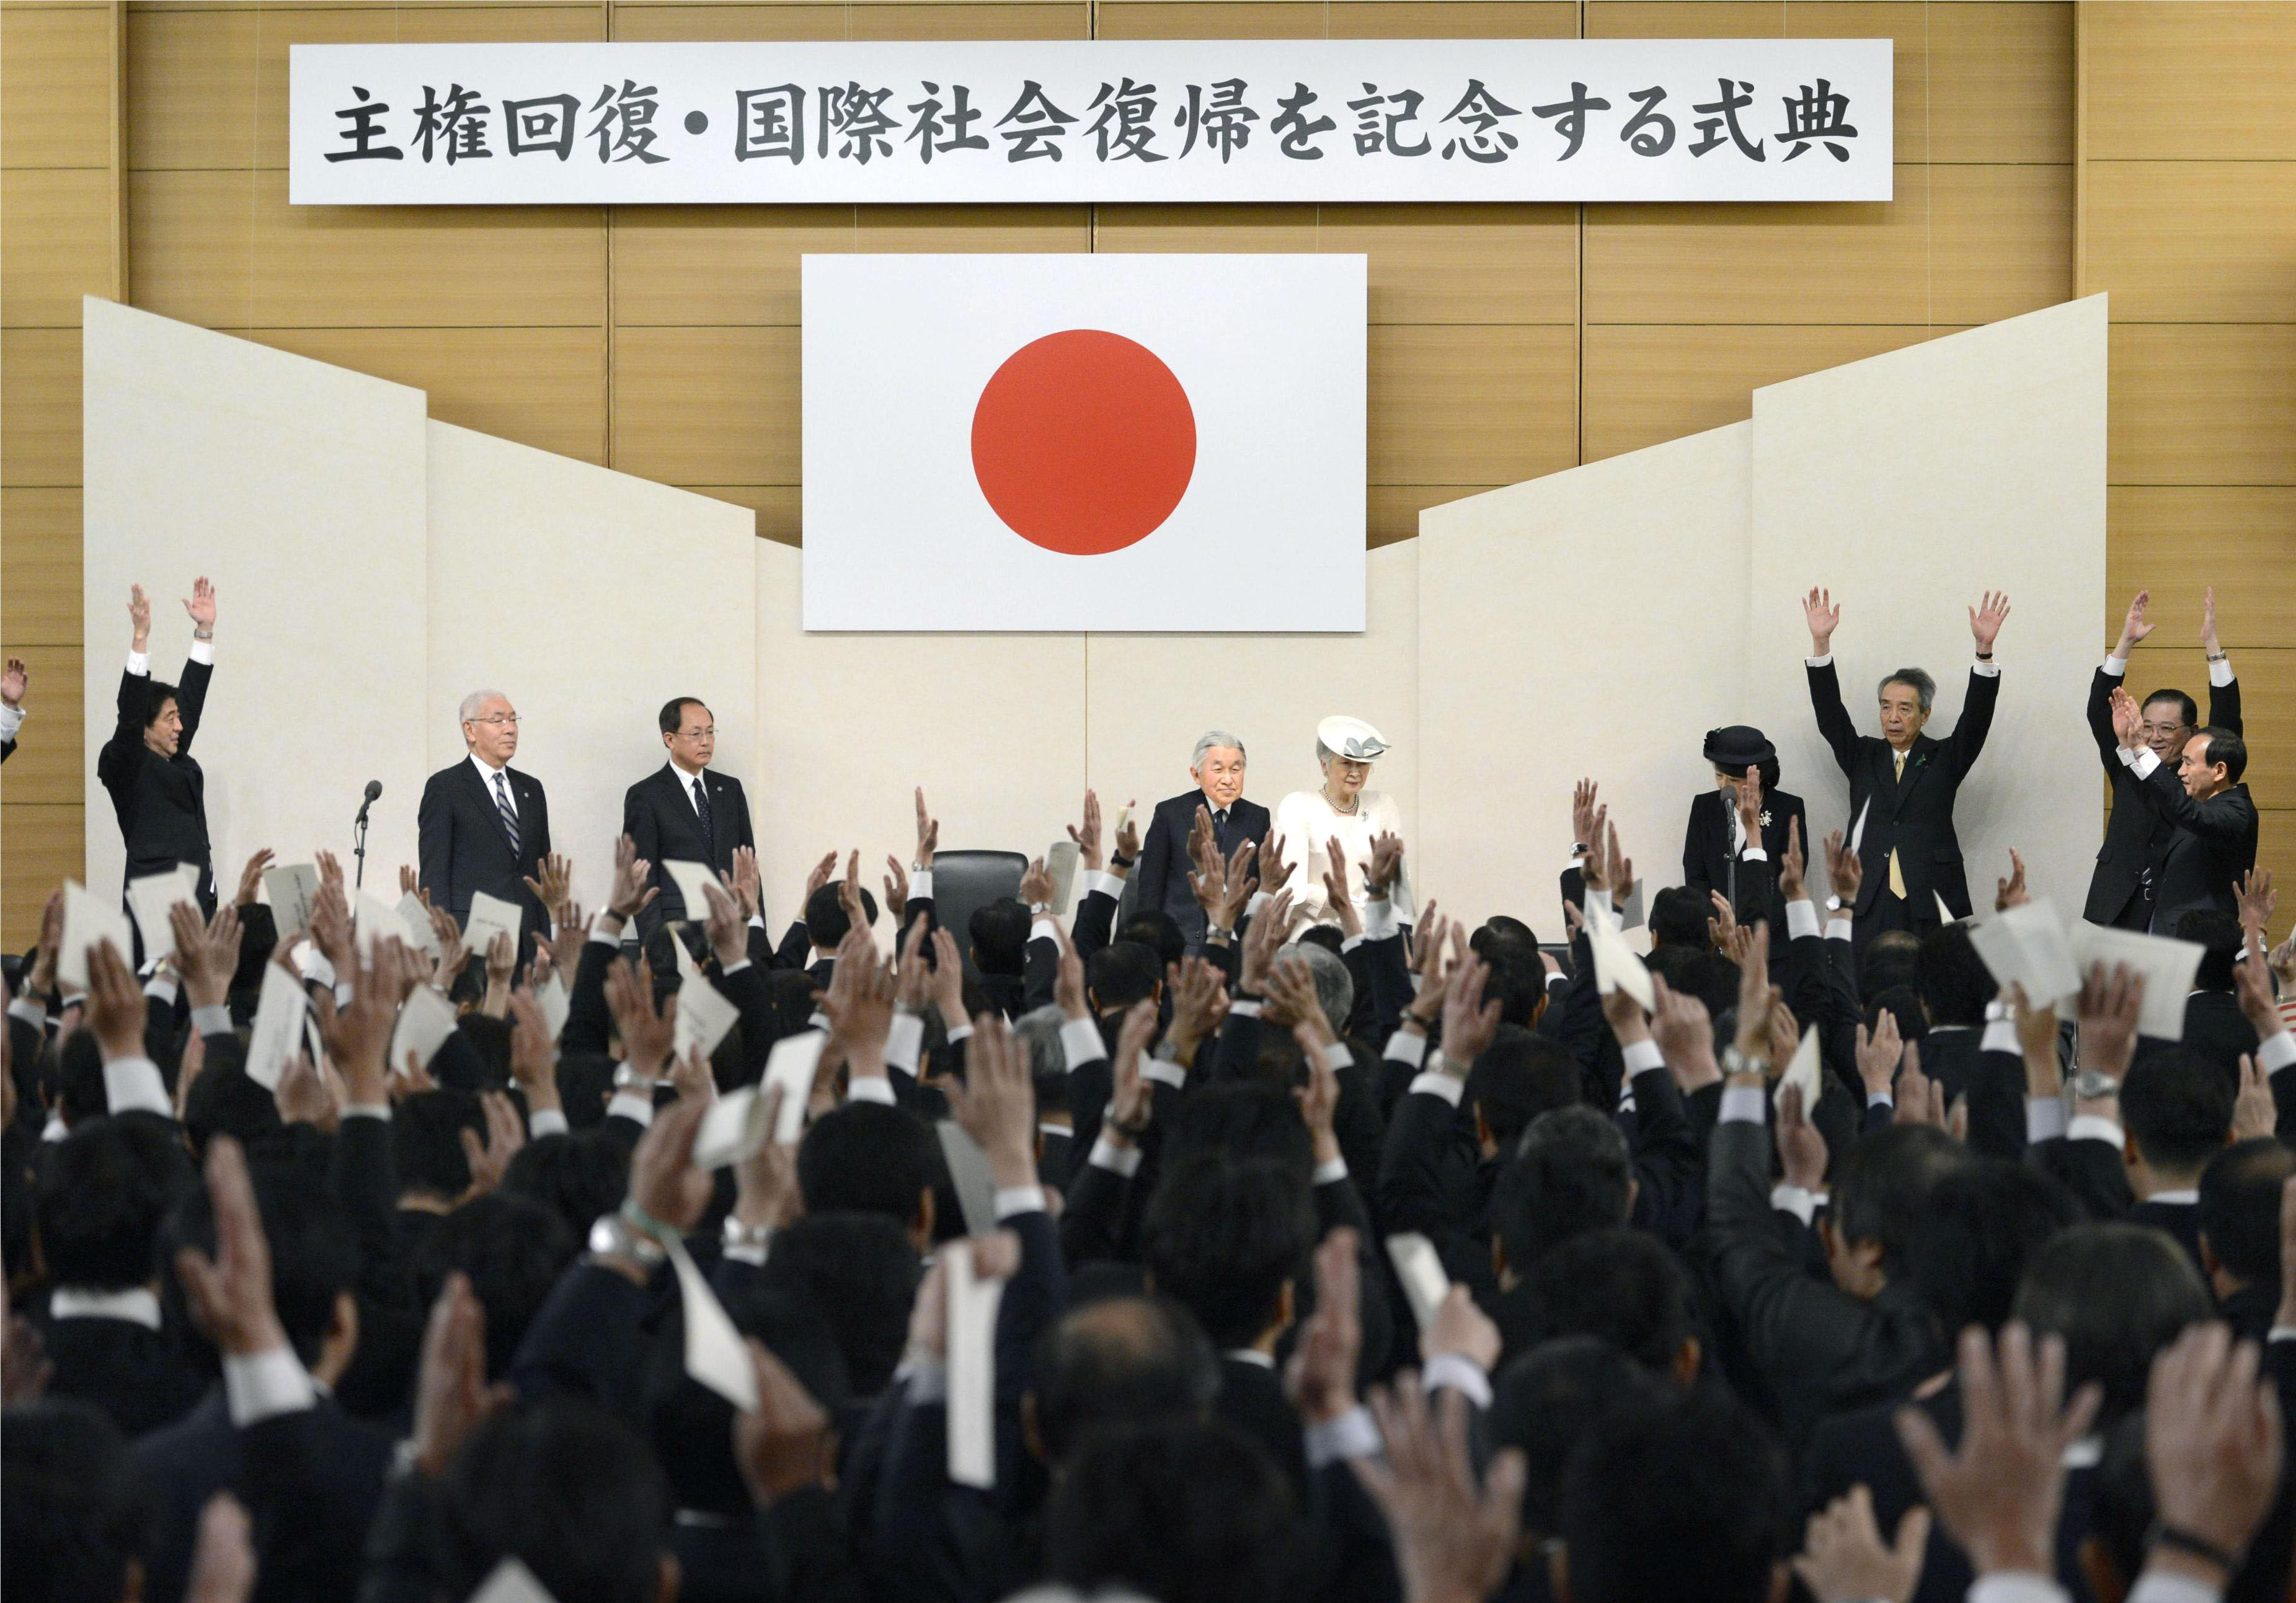 Celebrating sovereignty: Prime Minister Shinzo Abe (far left) and other conservative members of the Liberal Democratic Party raise a banzai cheer at a ceremony in Tokyo on Sunday marking the return of Japan's sovereignty following the signing of the San Francisco Peace Treaty in 1951. At center stage, Emperor Akihito and Empress Michiko look on. | KYODO